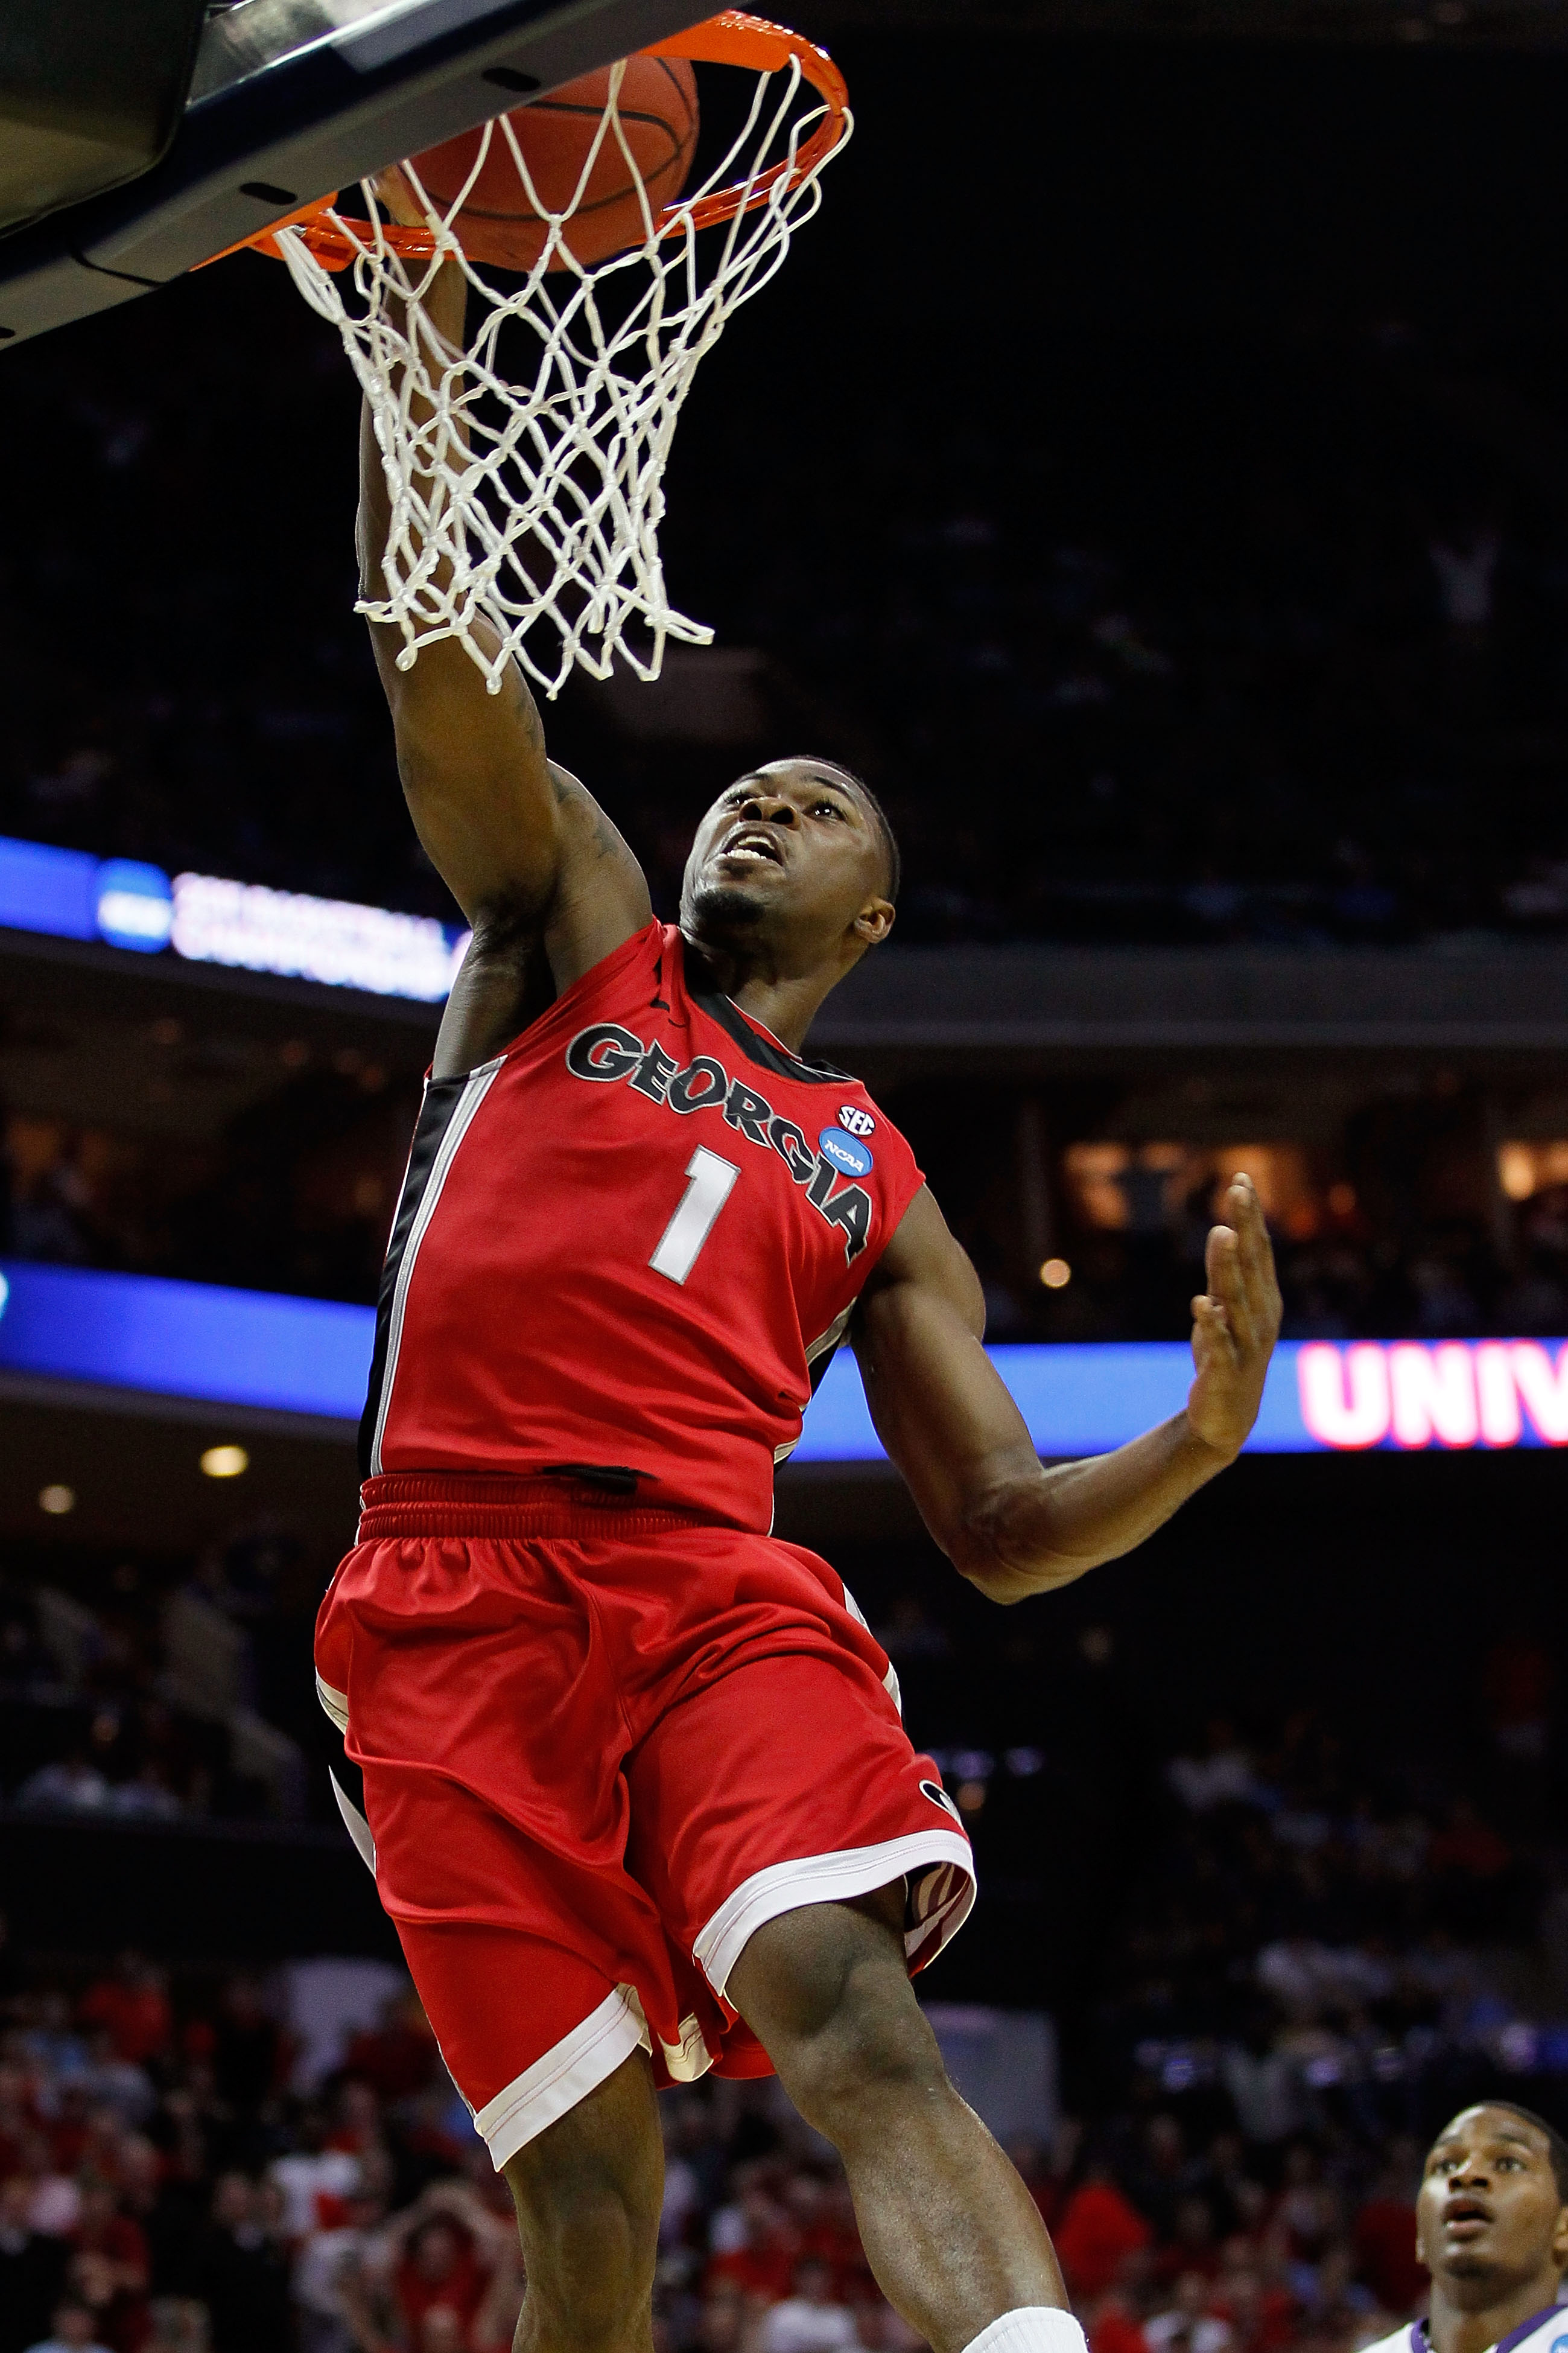 CHARLOTTE, NC - MARCH 18:  Travis Leslie #1 of the Georgia Bulldogs dunks the ball in the first half while taking on the Washington Huskies during the second round of the 2011 NCAA men's basketball tournament at Time Warner Cable Arena on March 18, 2011 i